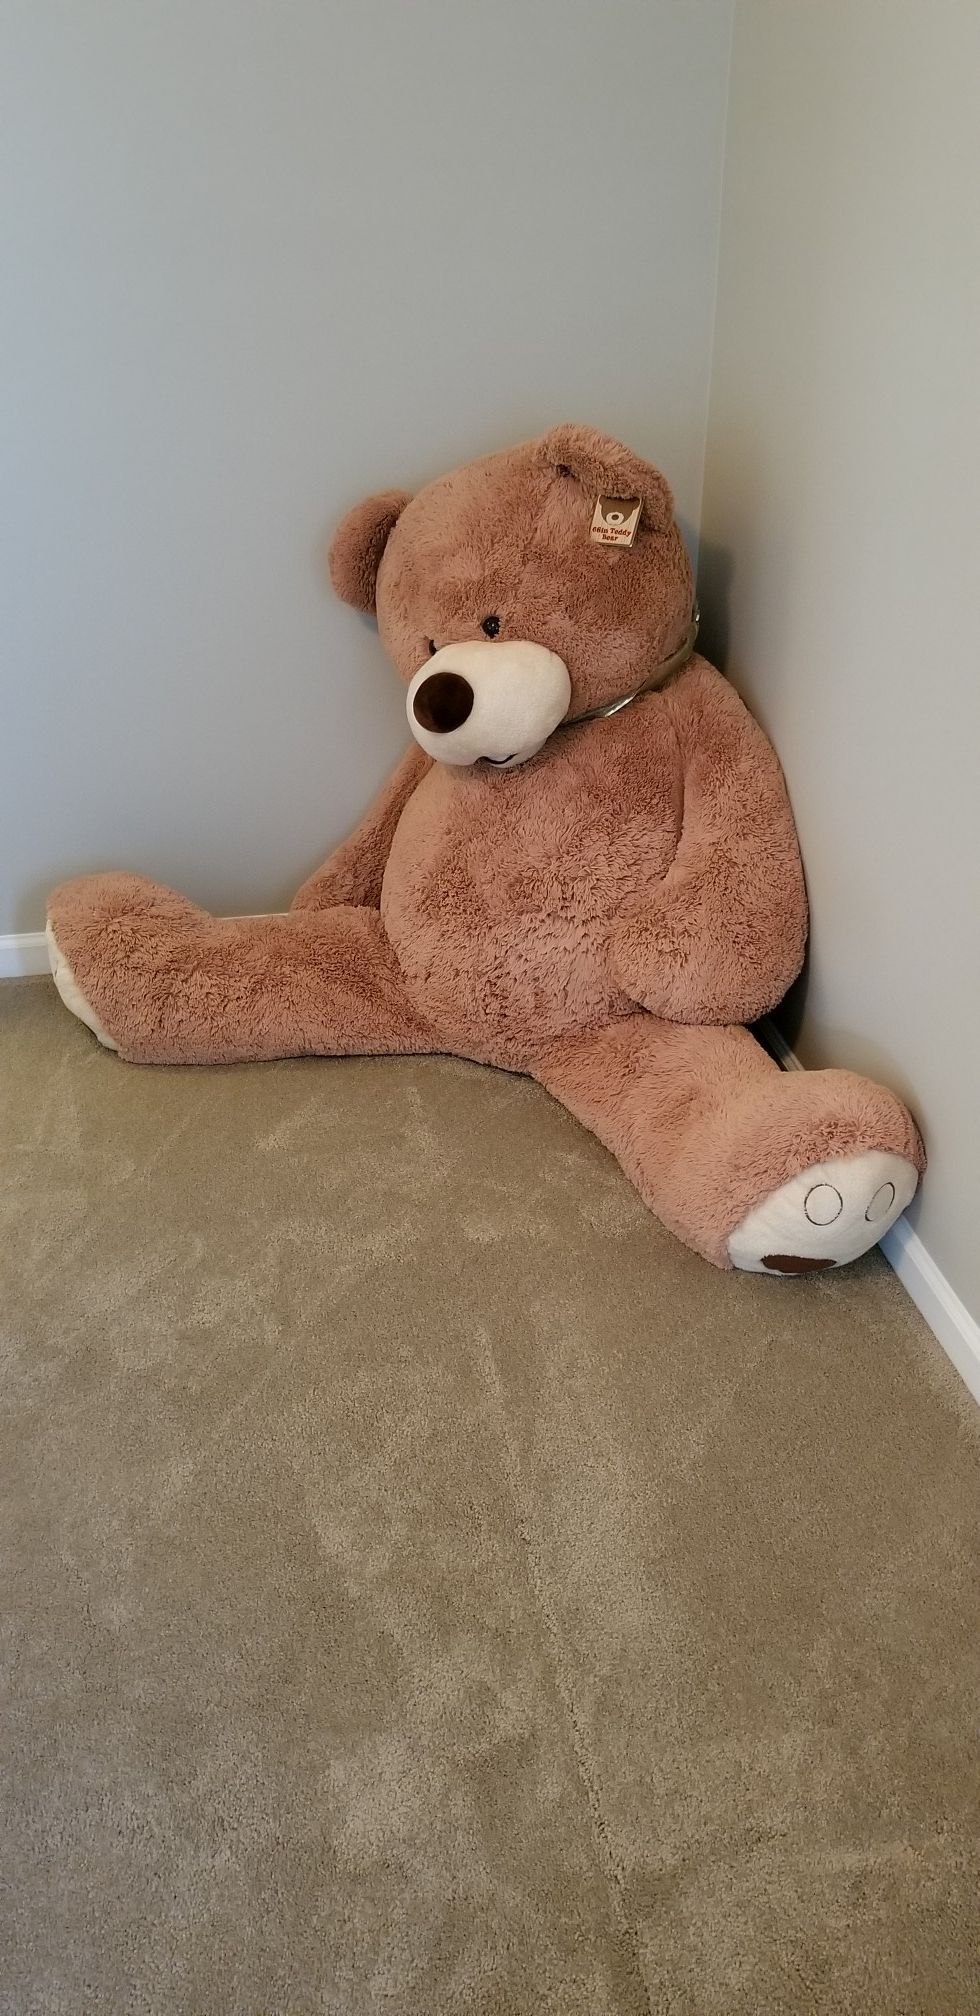 68" Teddy Bear excellent condition $25